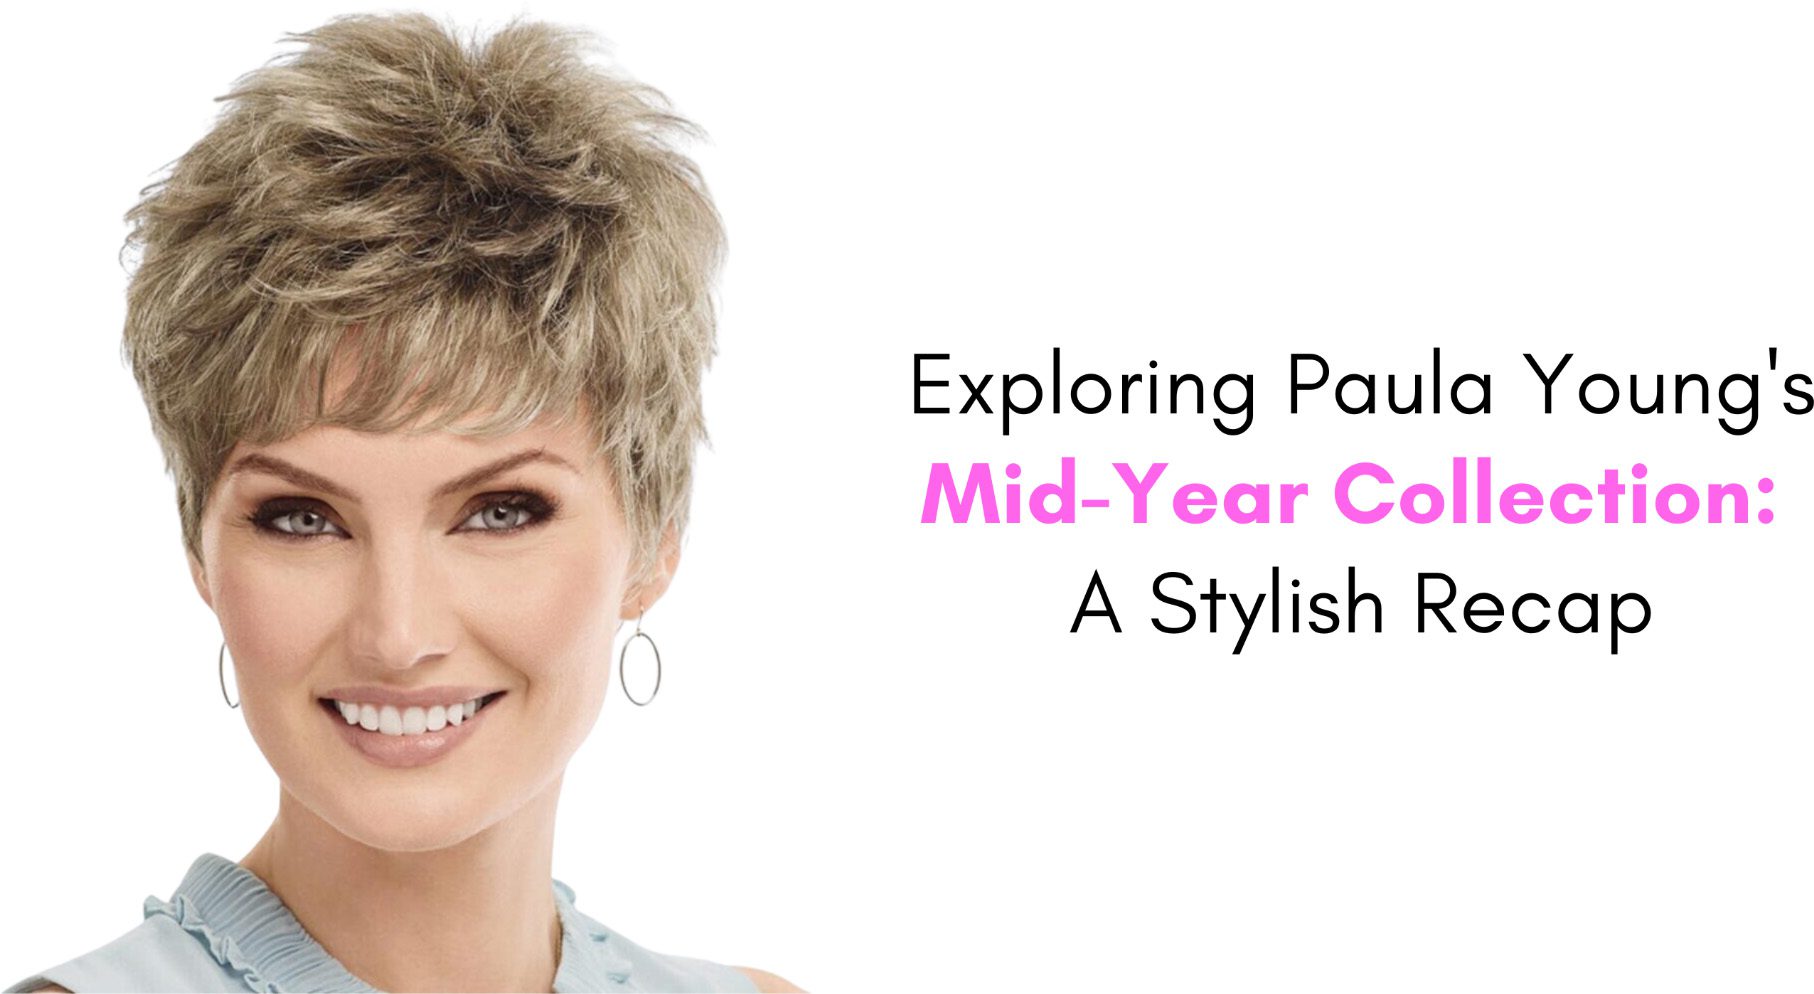 Exploring Paula Young’s Mid-Year Collection: A Stylish Recap